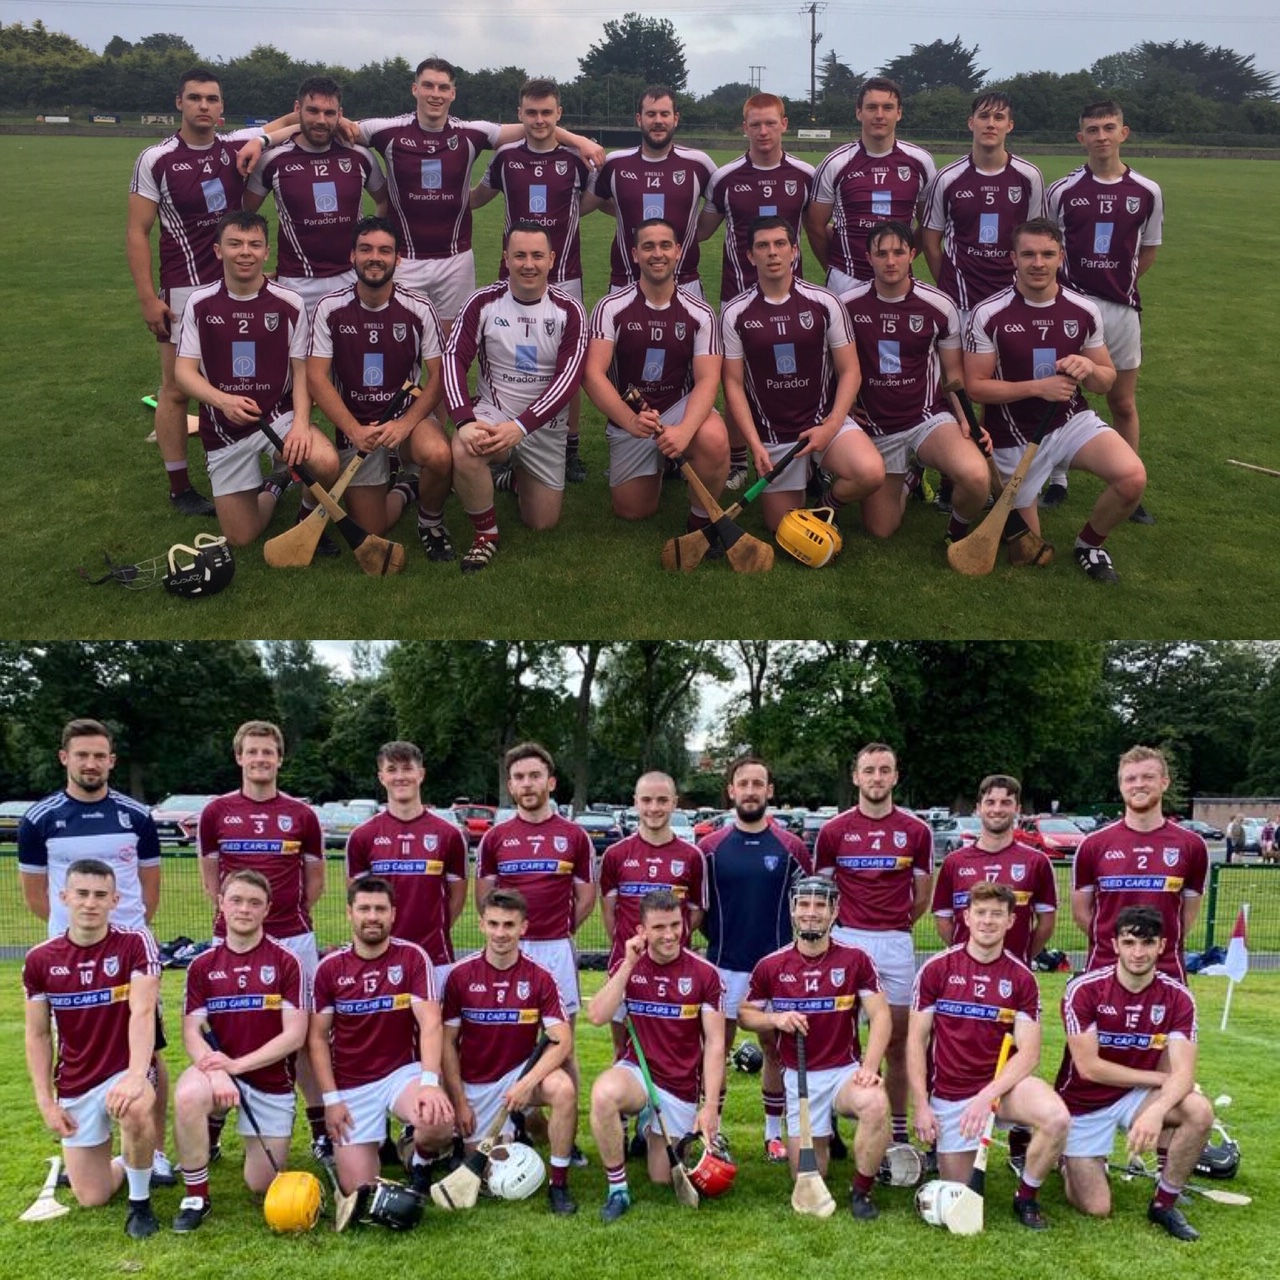 2 out of 2 wins for our senior hurlers!